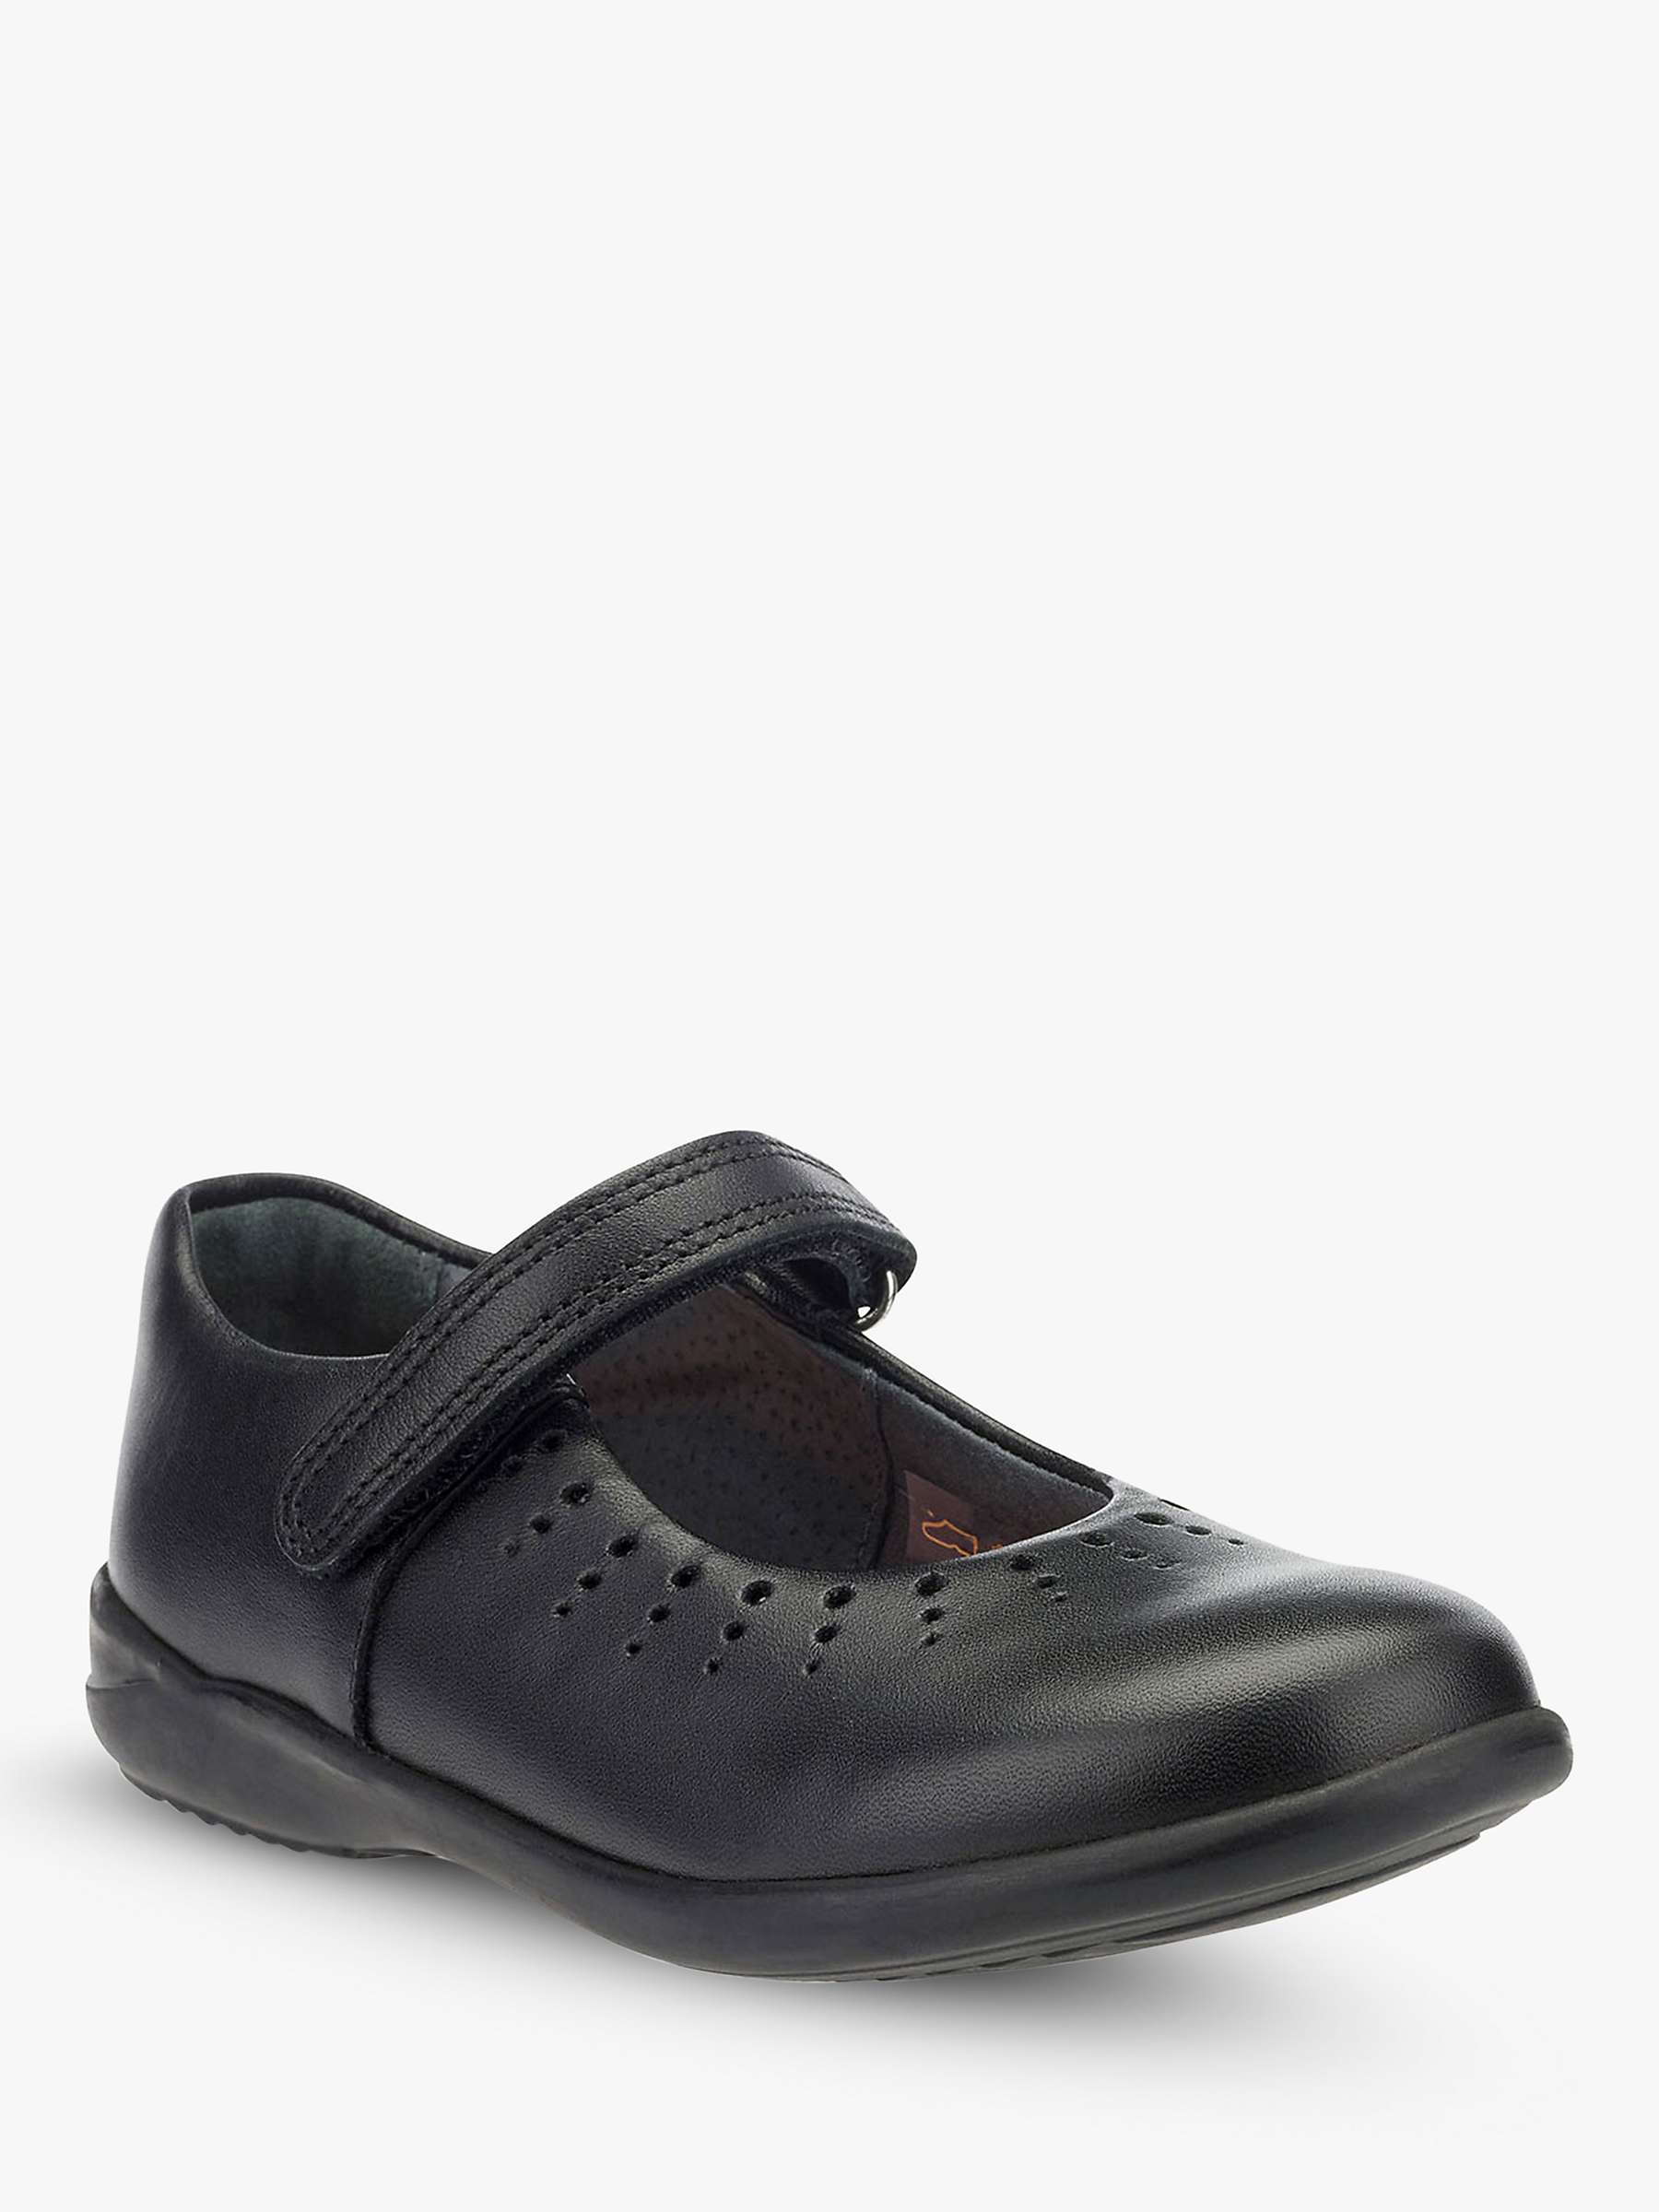 Buy Start-Rite Children's Mary Jane Leather Shoes, Black Online at johnlewis.com